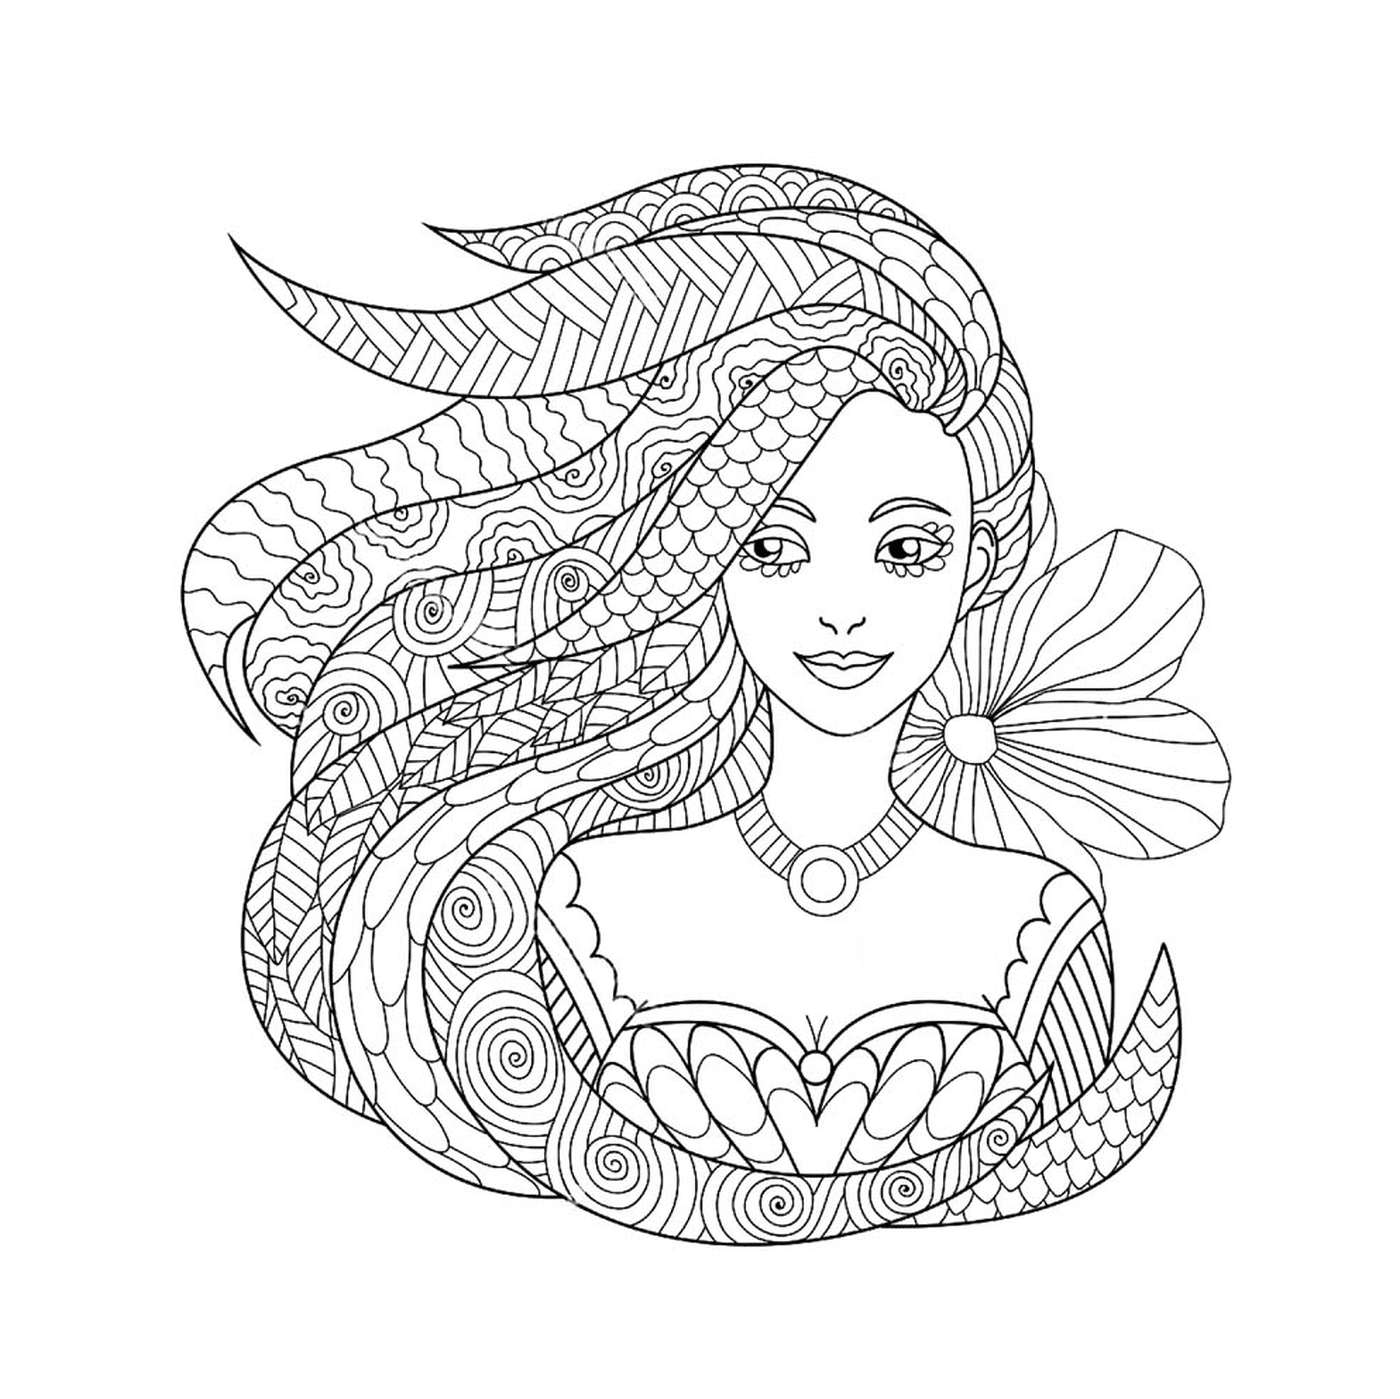  A woman with long undulating hair 